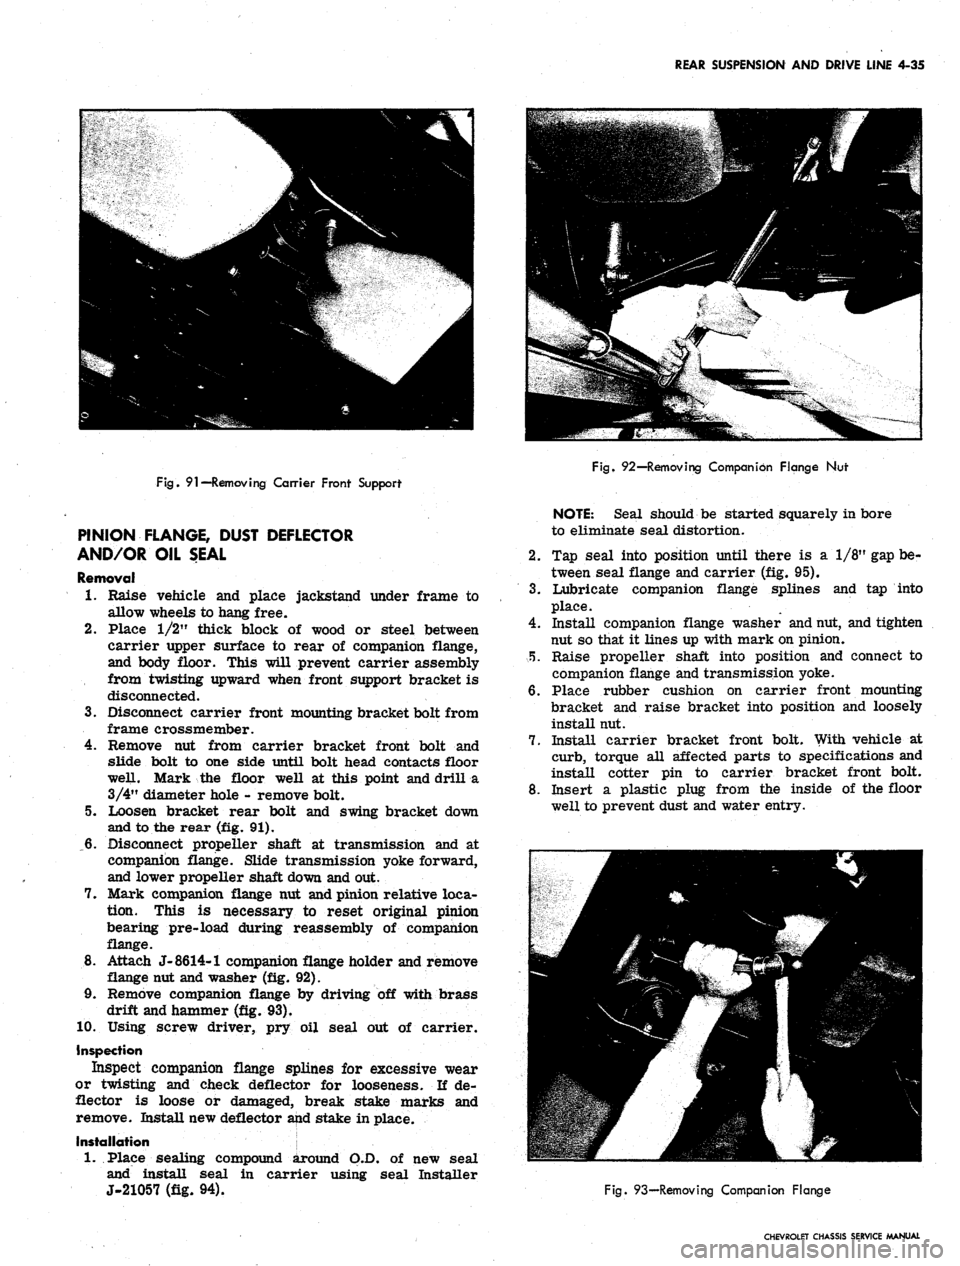 CHEVROLET CAMARO 1967 1.G Chassis Workshop Manual 
REAR SUSPENSION AND DRIVE LINE 4-35

Fig.
 91—
 Removing Carrier Front Support

PINION FLANGE, DUST DEFLECTOR

AND/OR OIL SEAL

Removal

1.
 Raise vehicle and place jackstand under frame to

allow 